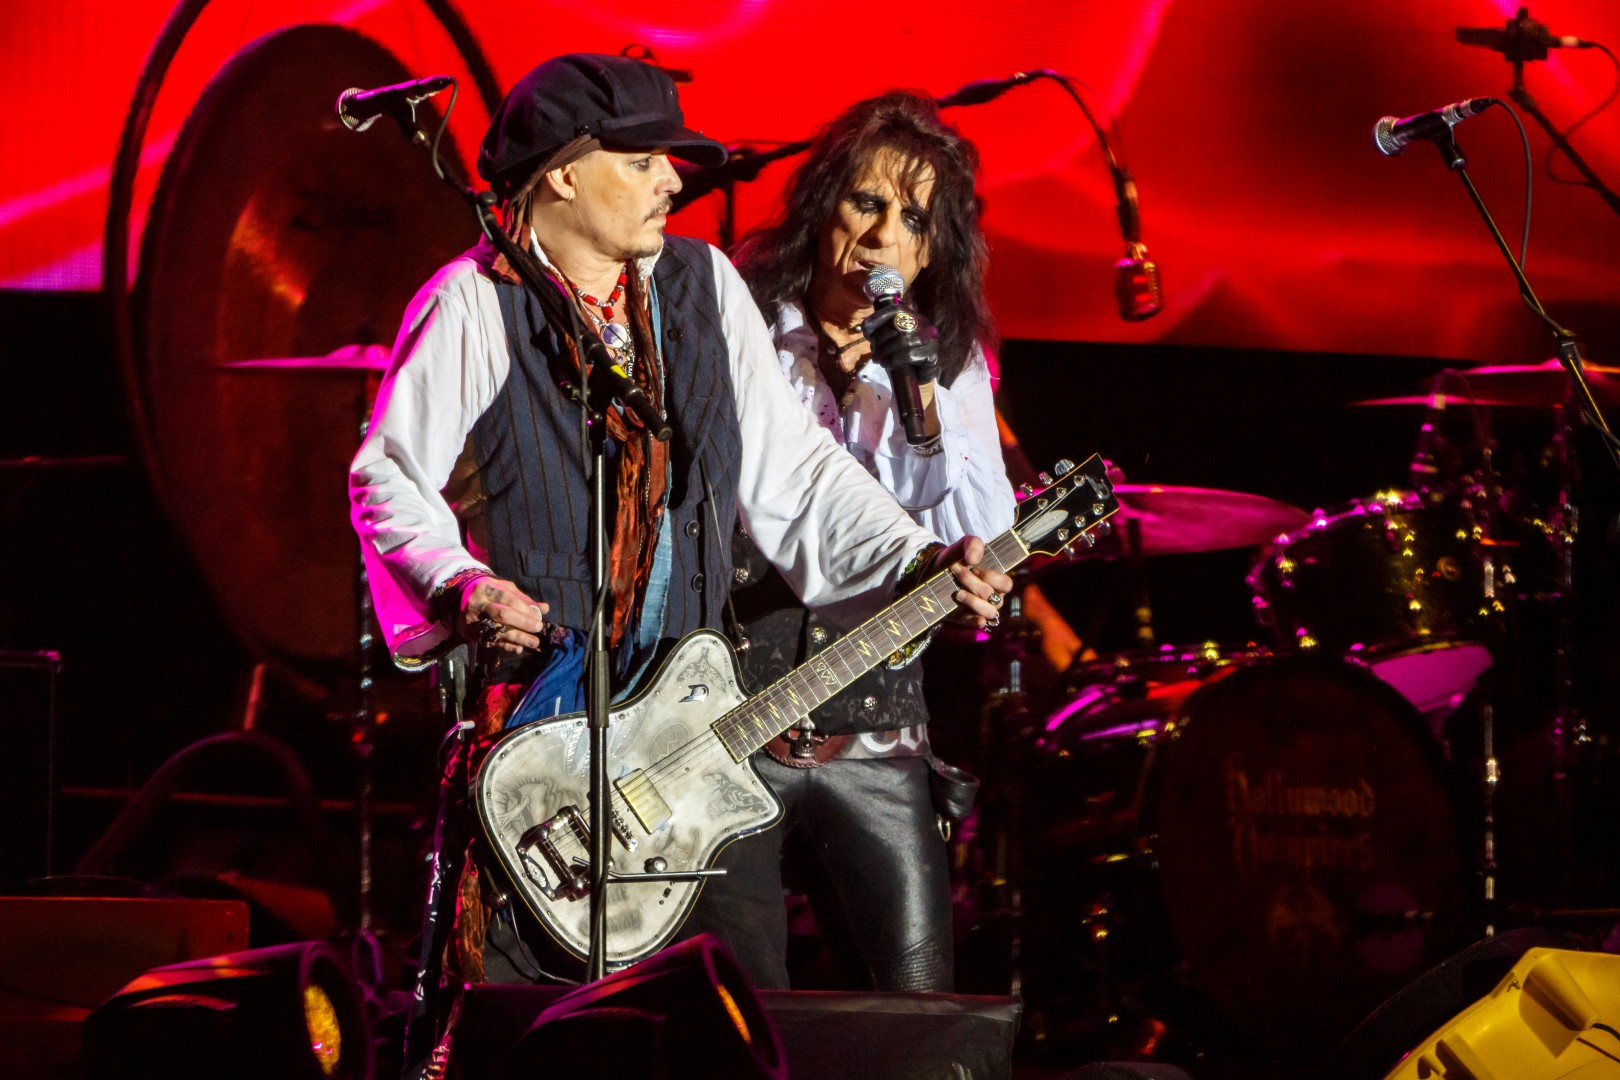 Hollywood Vampires at Romexpo in Bucharest on June 6, 2016